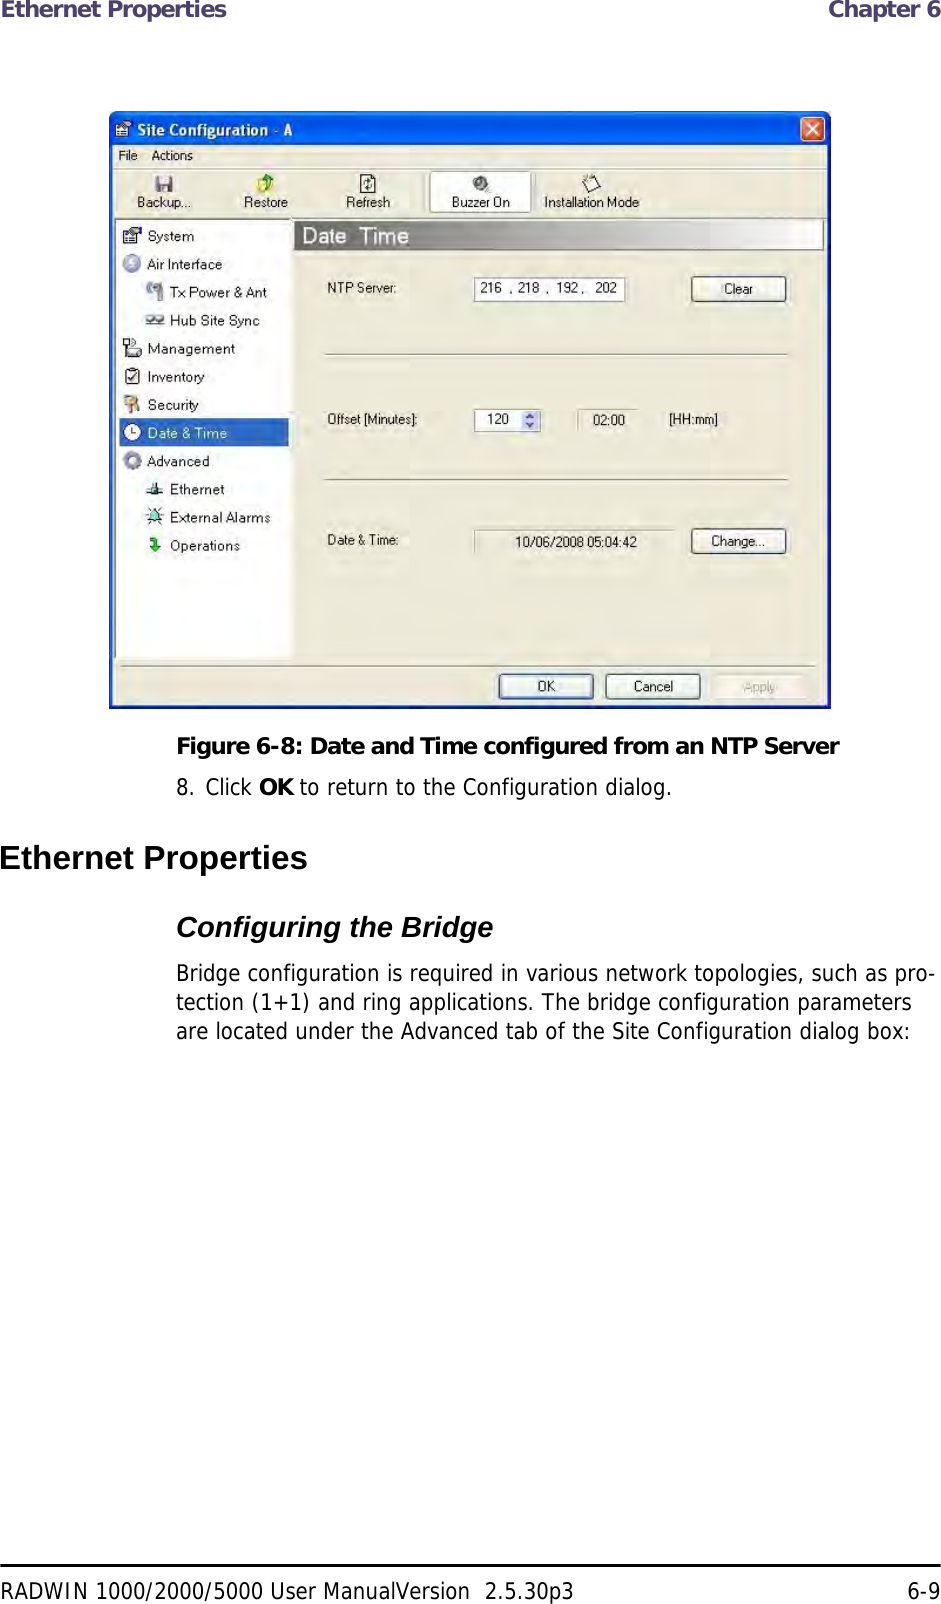 Ethernet Properties  Chapter 6RADWIN 1000/2000/5000 User ManualVersion  2.5.30p3 6-9Figure 6-8: Date and Time configured from an NTP Server8. Click OK to return to the Configuration dialog.Ethernet PropertiesConfiguring the Bridge Bridge configuration is required in various network topologies, such as pro-tection (1+1) and ring applications. The bridge configuration parameters are located under the Advanced tab of the Site Configuration dialog box: